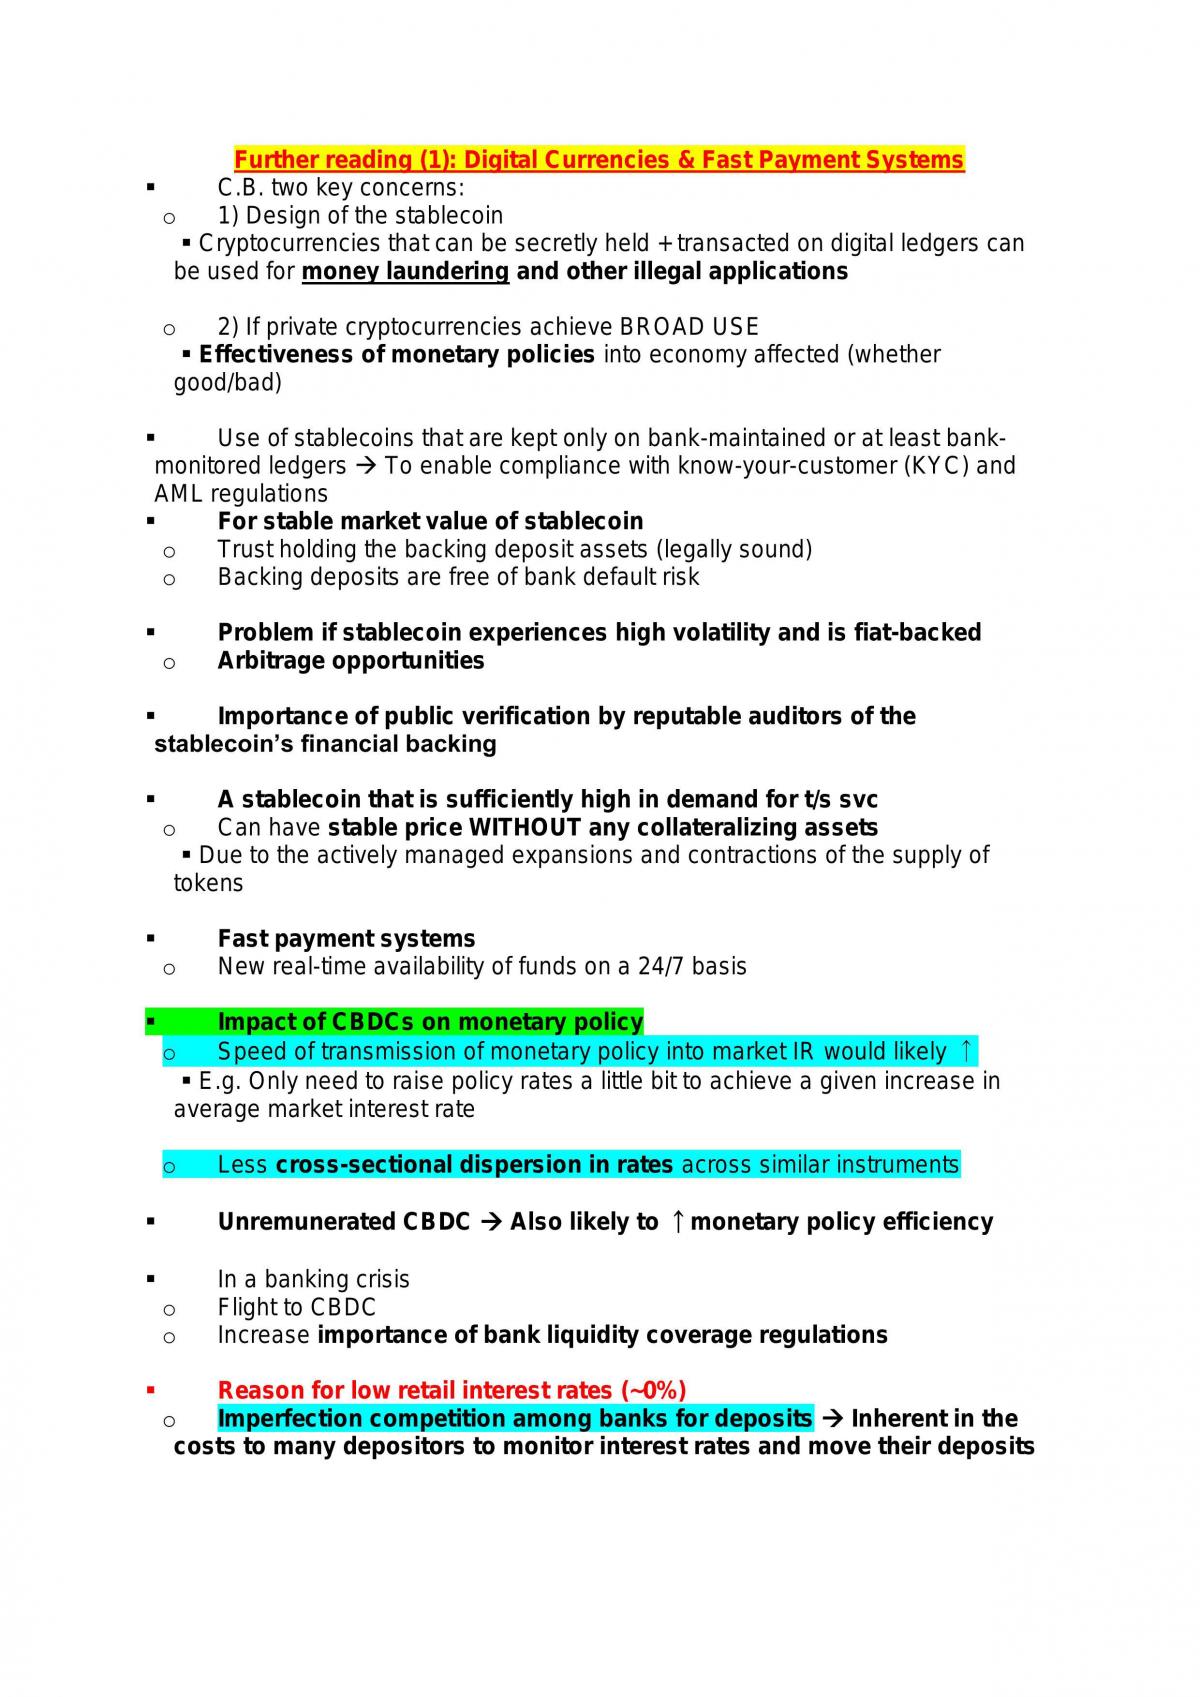 BF2214 - FinTech in Investment Management complete notes - Page 14